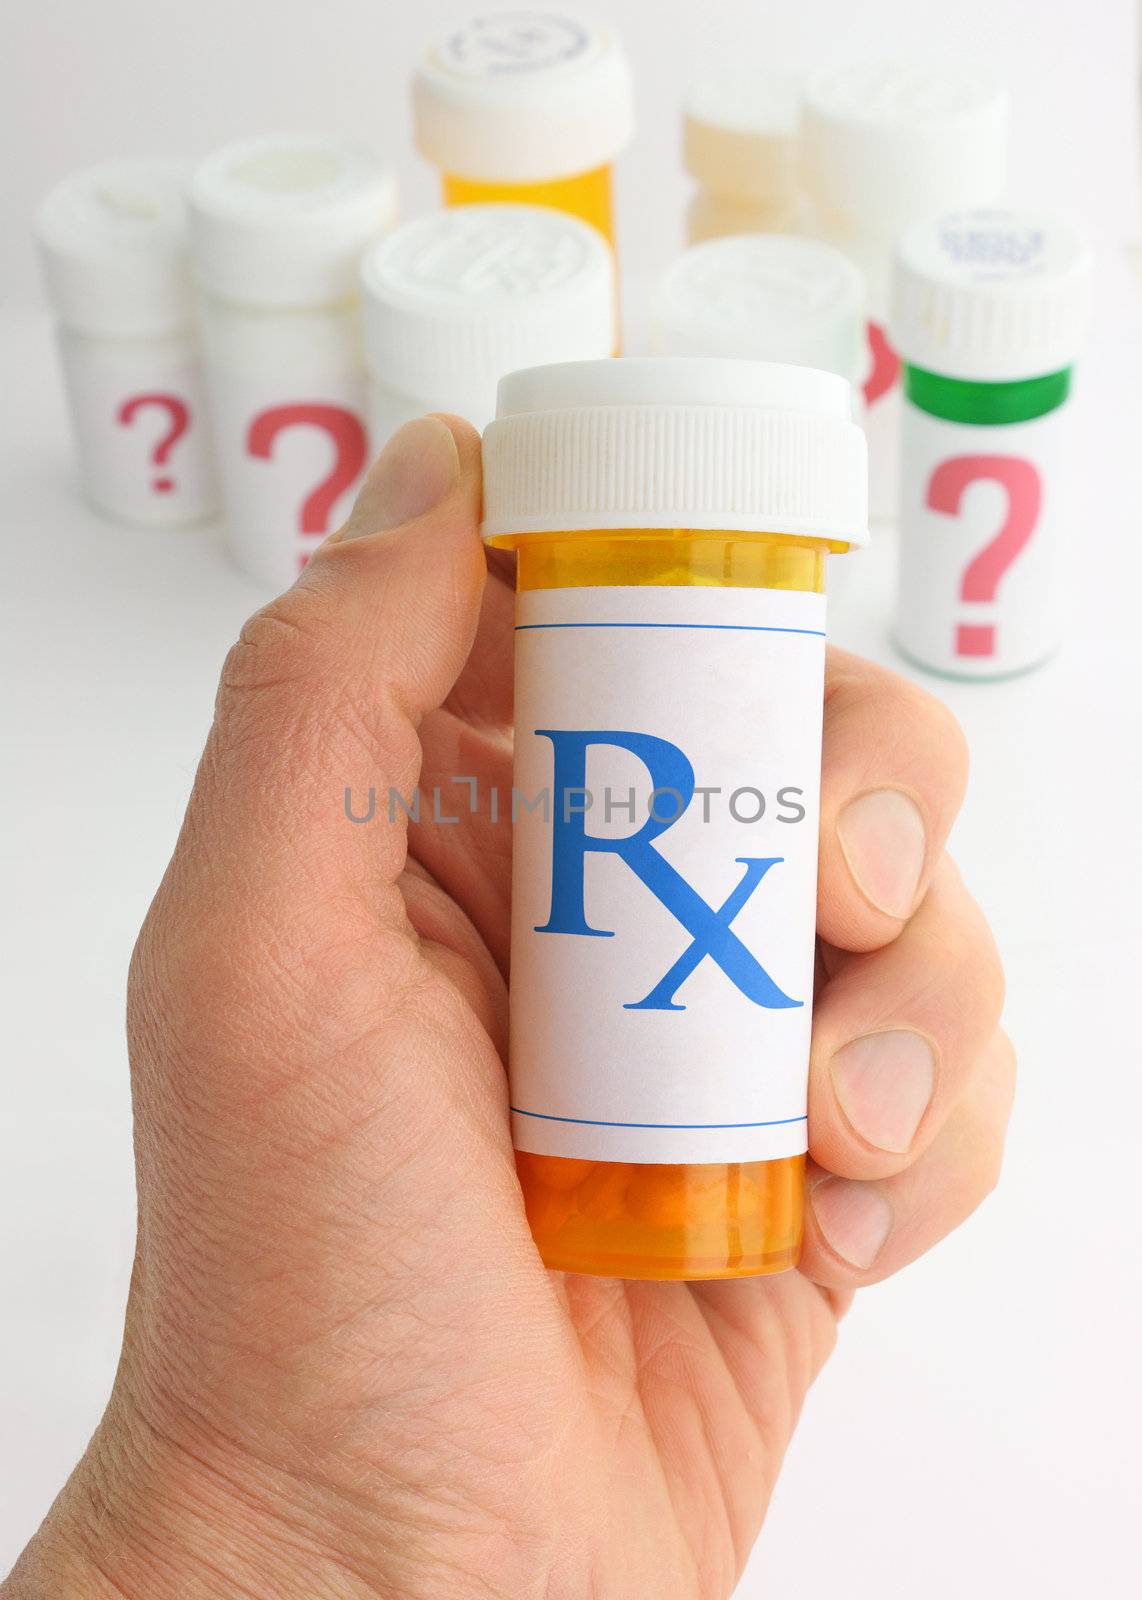 A hand holding a medicine bottle marked with an Rx pharmacy mark. A variety of pill bottles labeled with large question marks are in the background.